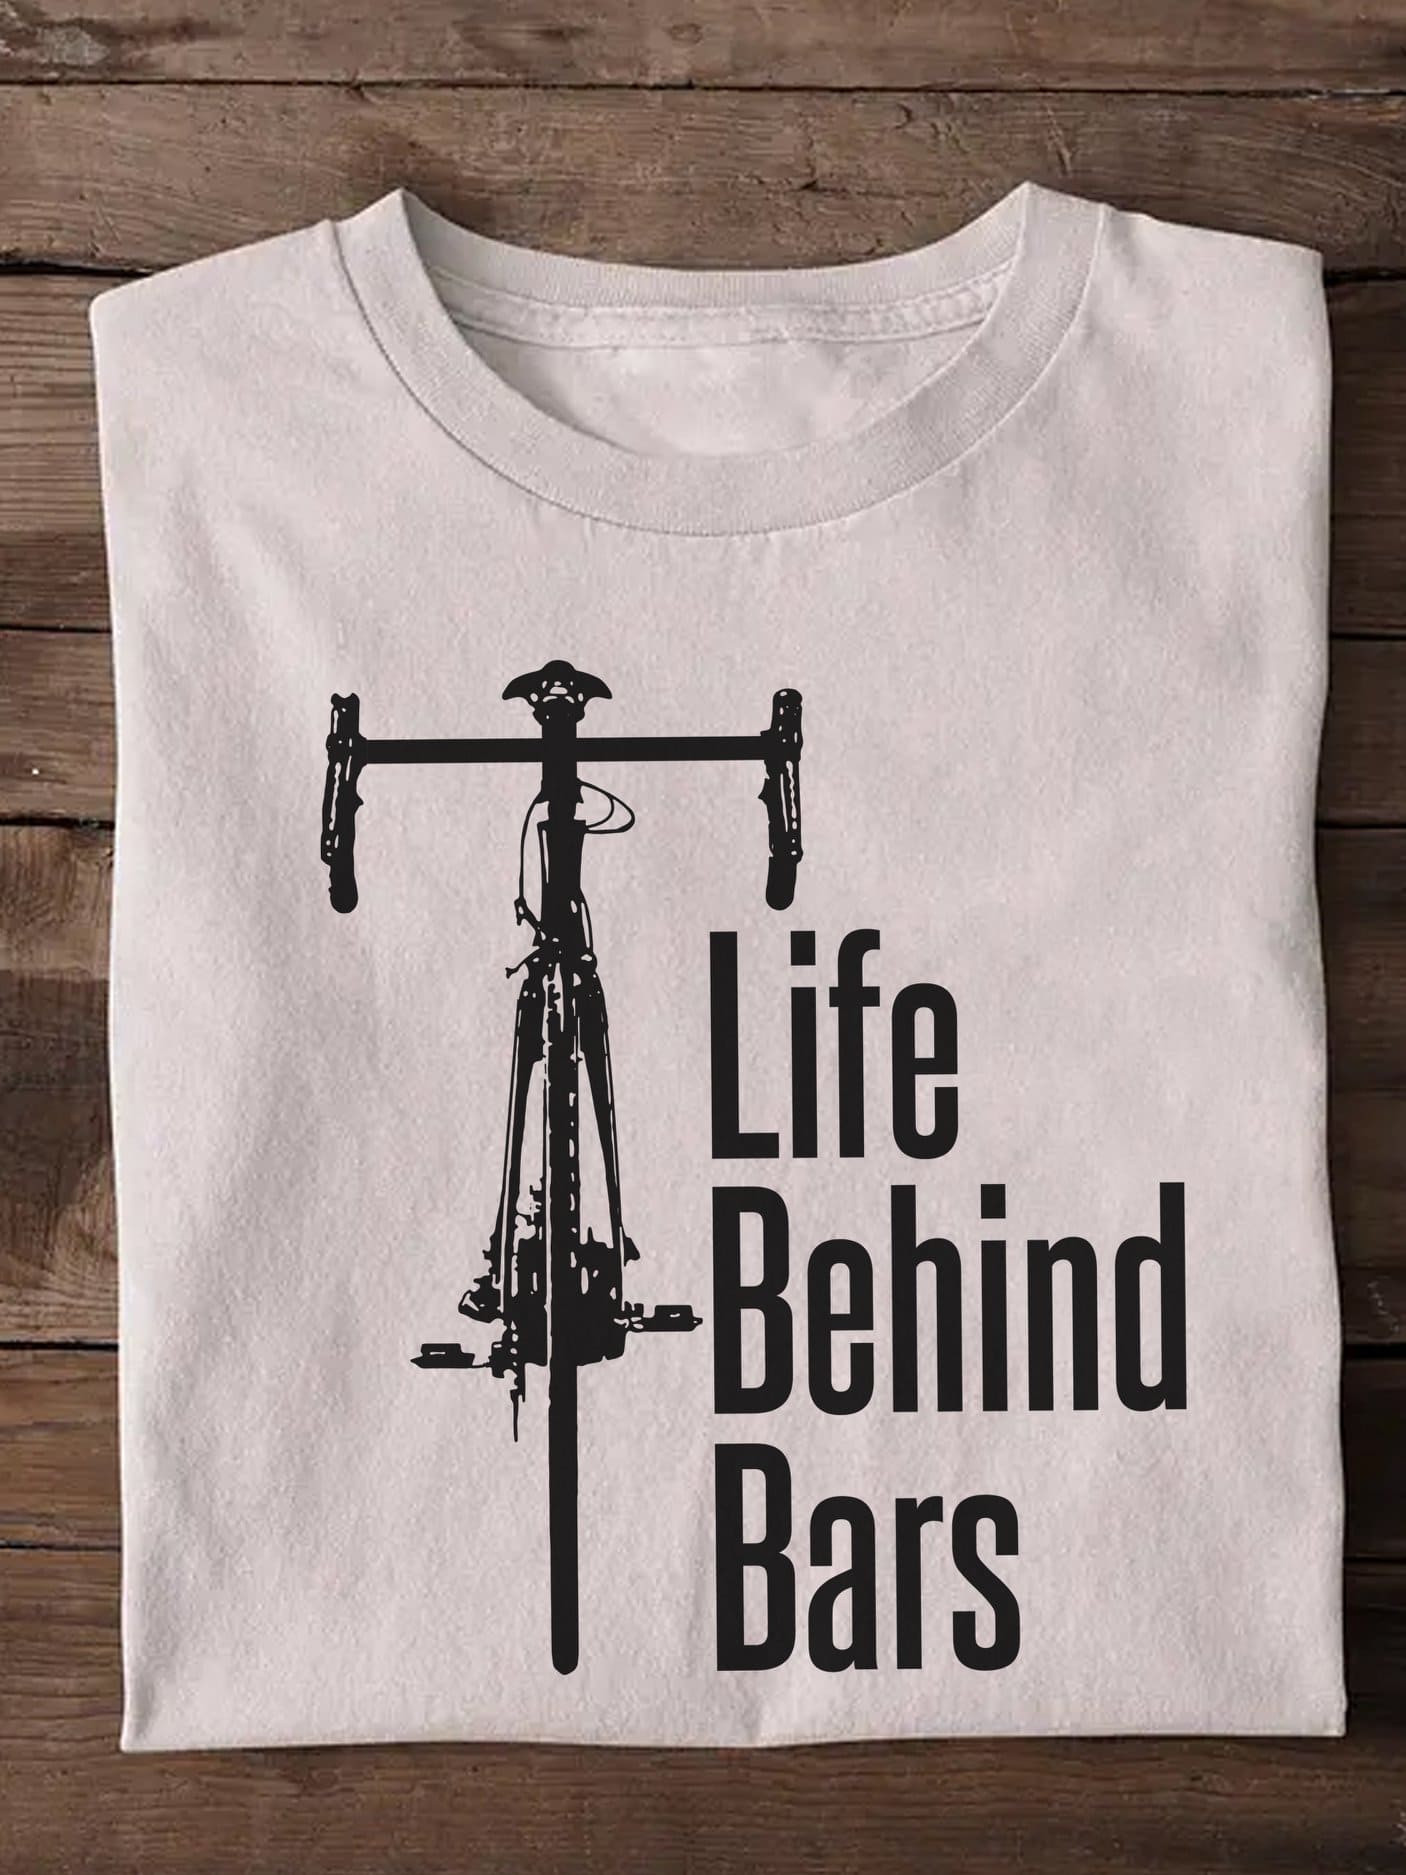 Life behind bars - Gift for cycologist, love riding bicycle